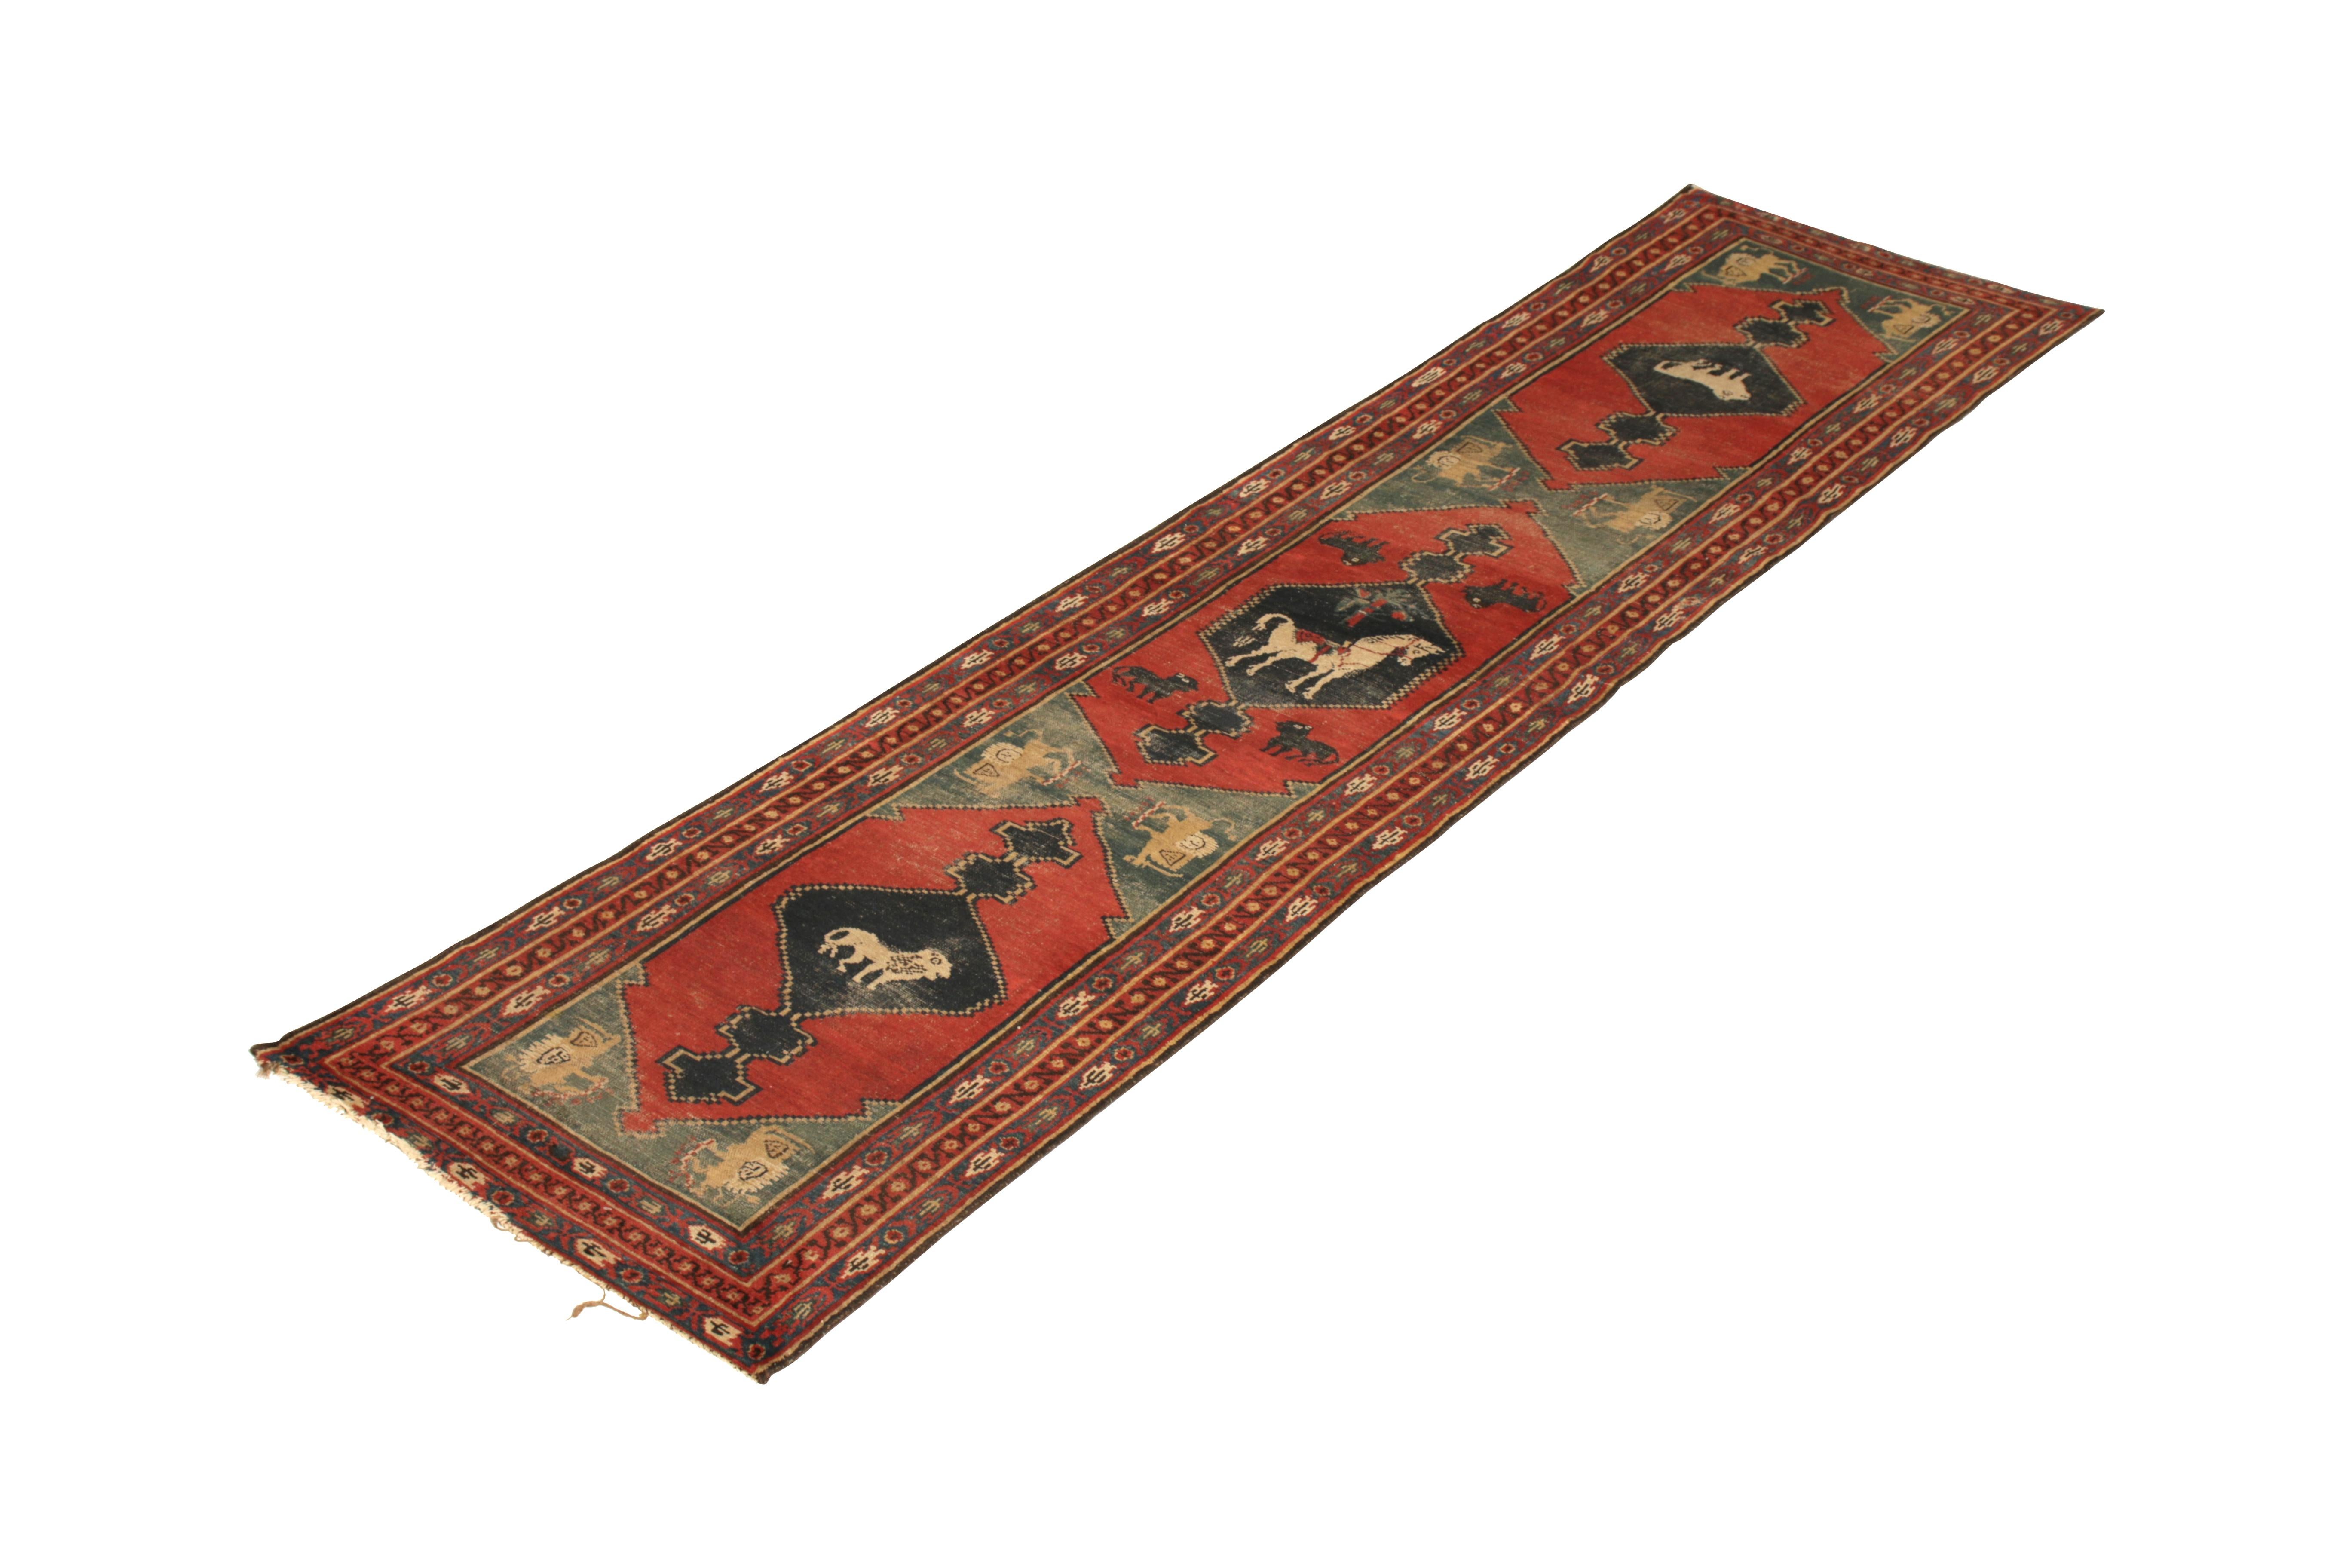 Handmade with hand knotted wool originating circa 1910-1920, this collectible Gabbeh wool rug is an antique Persian runner in red, blue, and beige colorway hues. This particular transitional antique Persian rug features a rare pictorial reflecting